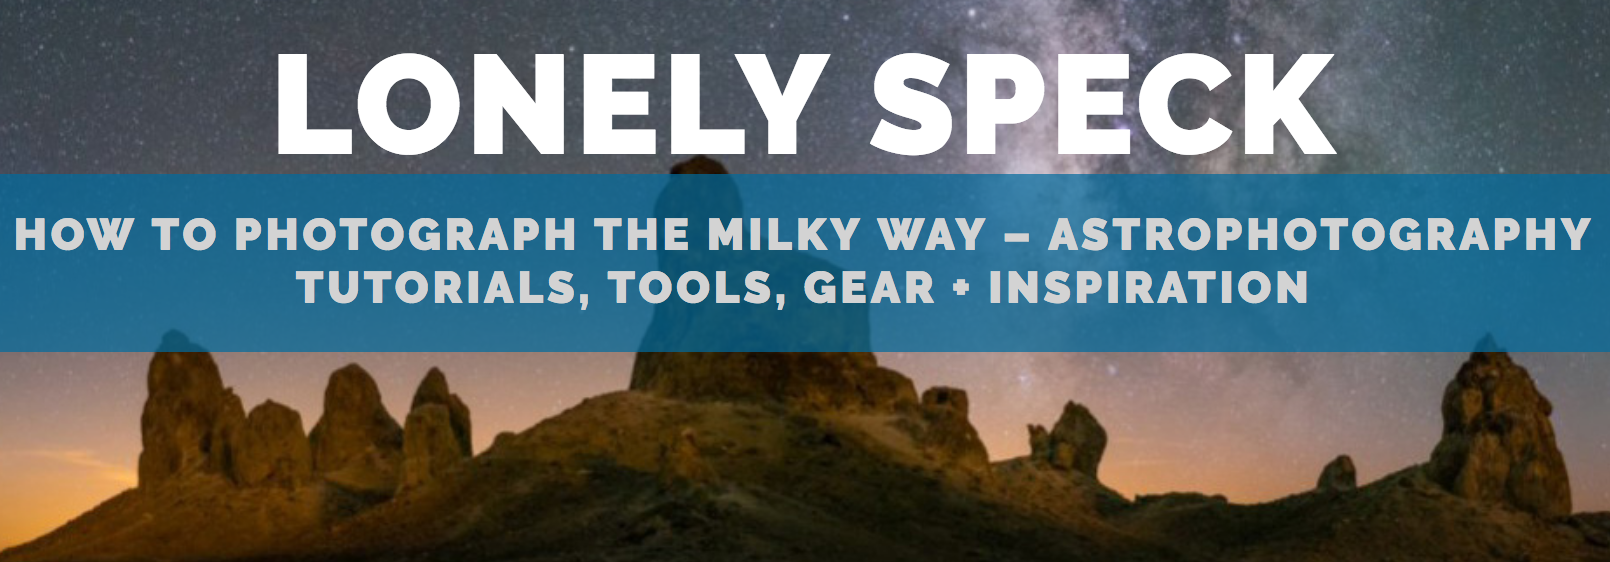 lonely spec web site banner